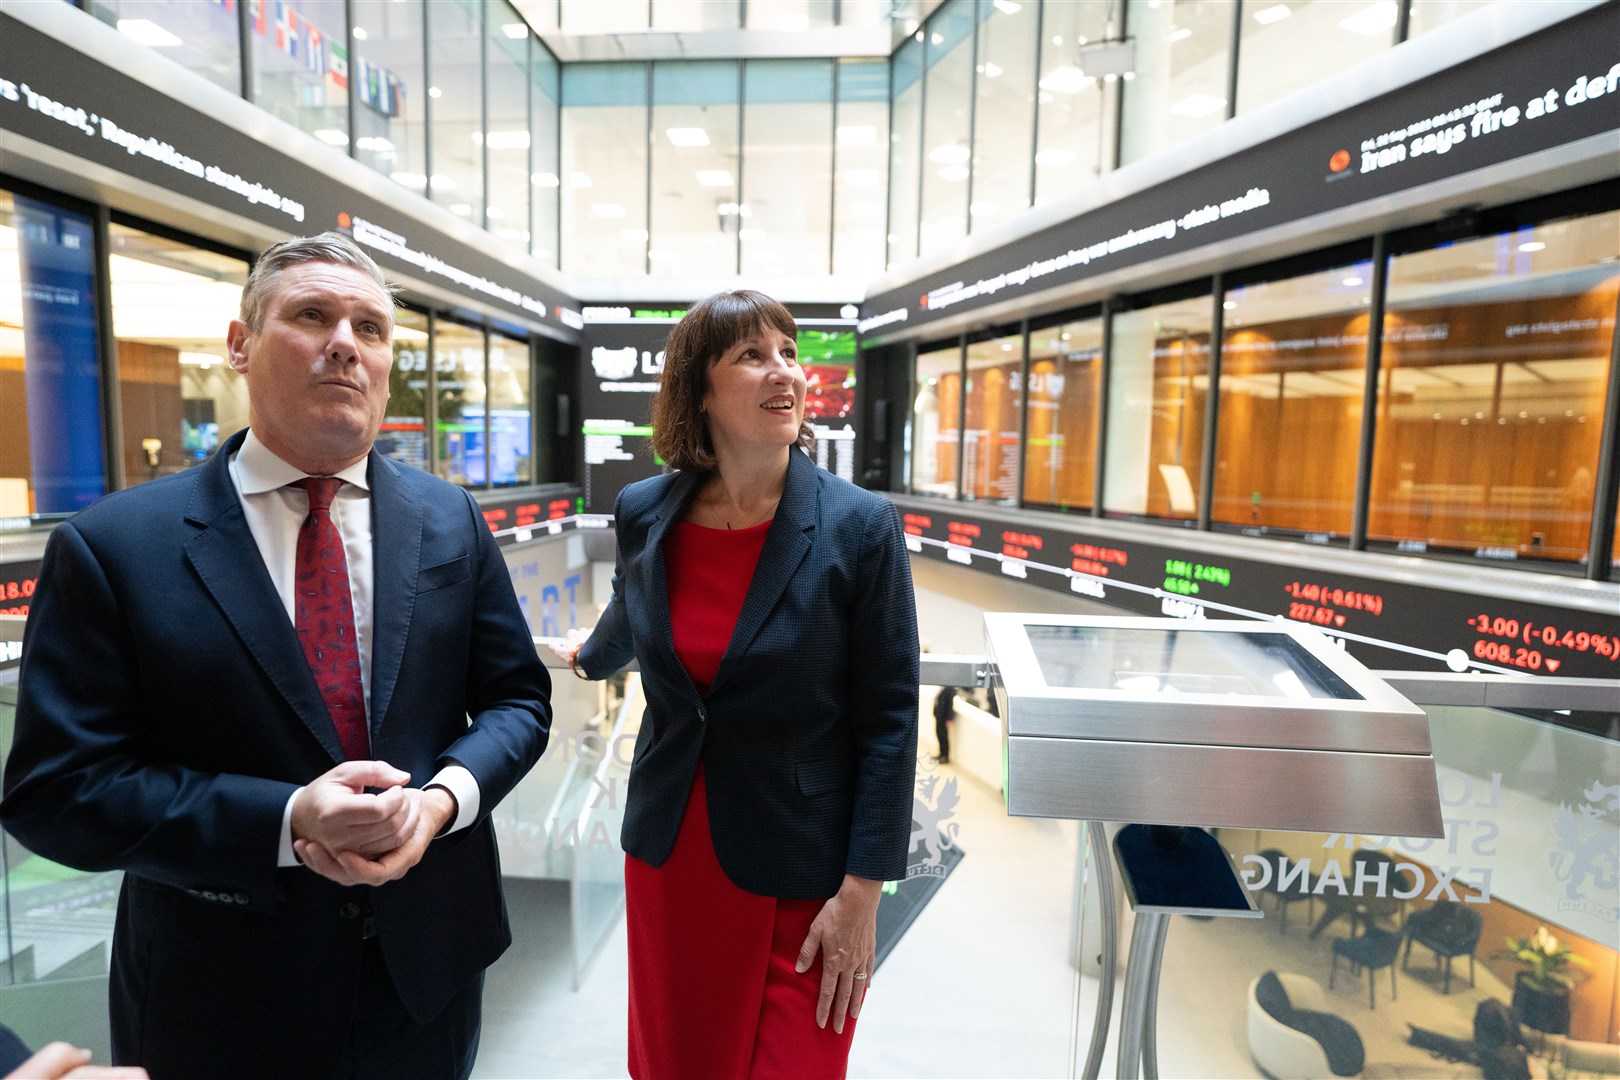 Labour leader Sir Keir Starmer was speaking at the London Stock Exchange alongside shadow chancellor Rachel Reeves (Stefan Rousseau/PA)